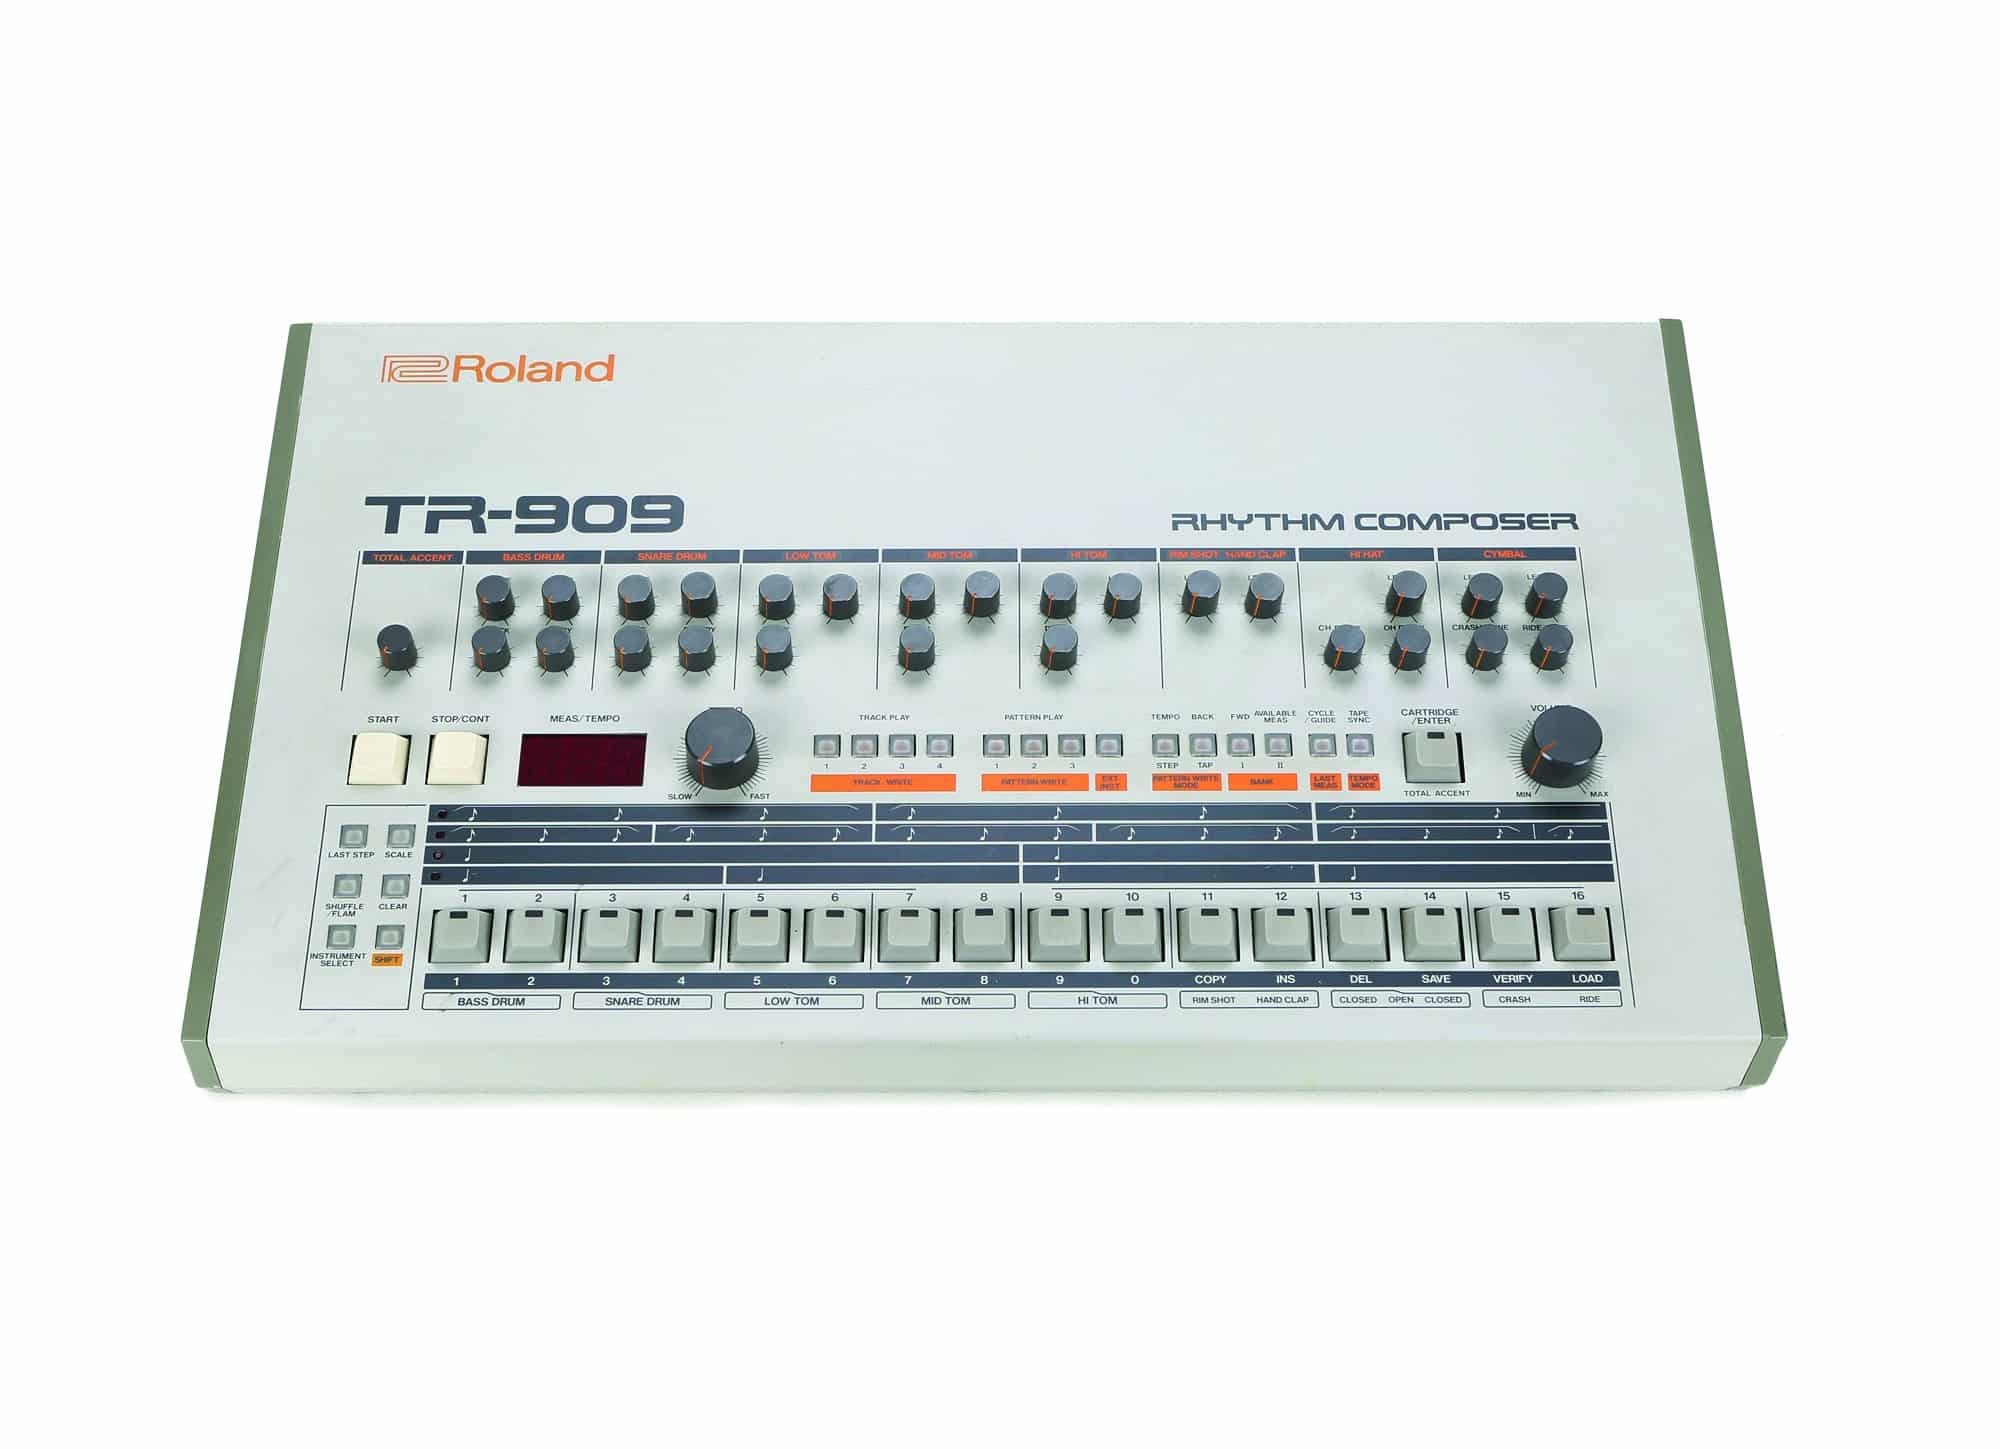 The Roland TR-909 synthesizer